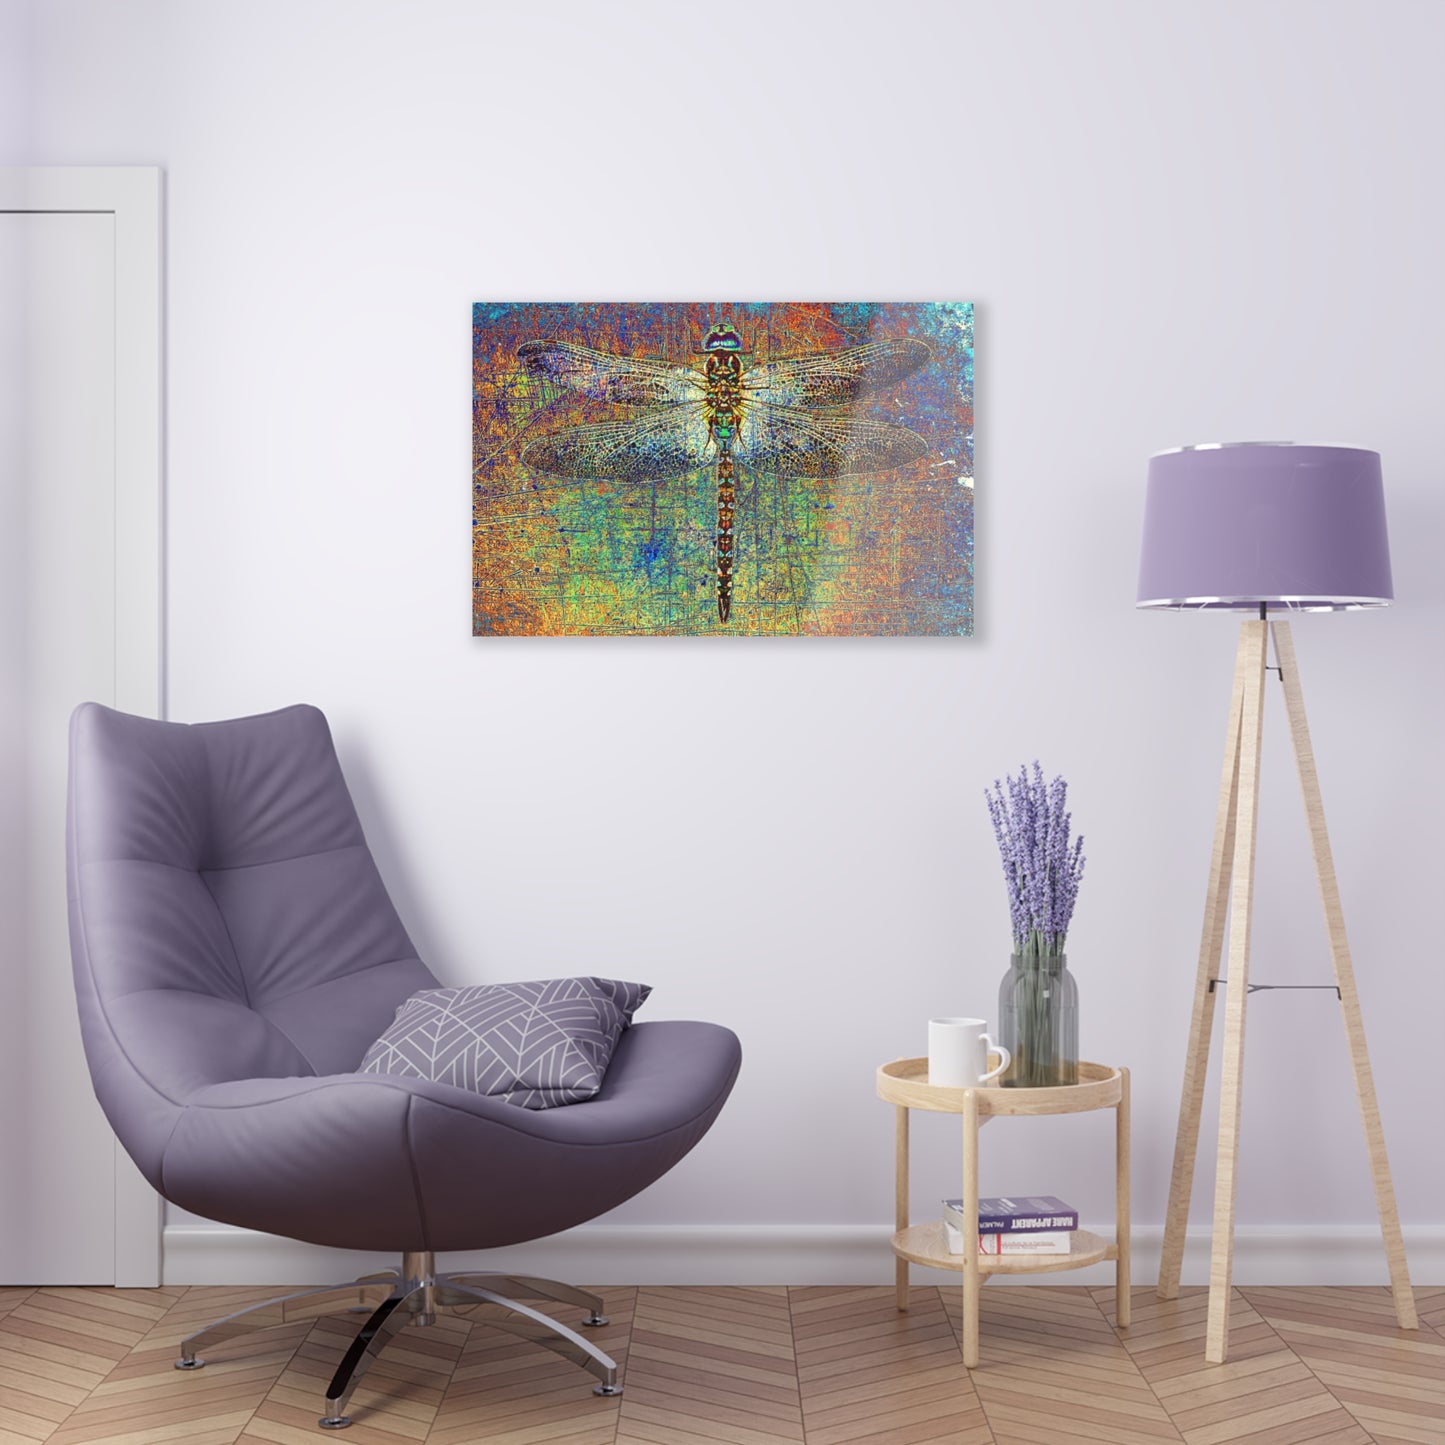 Dragonfly on Multicolor Background Printed on a Crystal Clear Acrylic Panel 30x20 hung on white wall